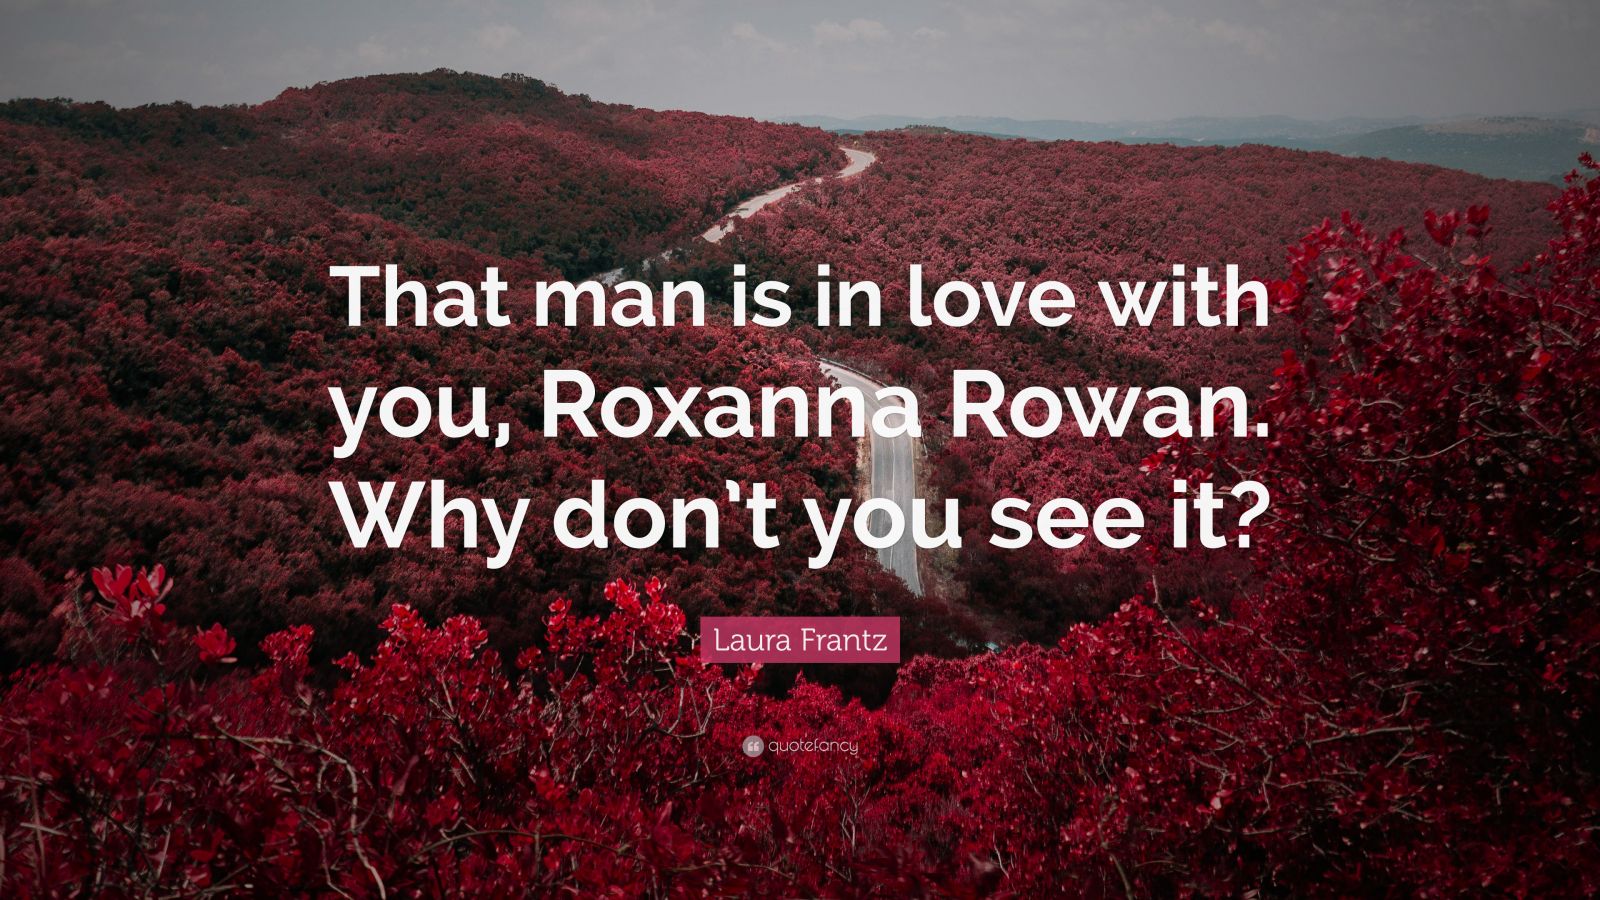 Laura Frantz Quote “that Man Is In Love With You Roxanna Rowan Why Dont You See It” 